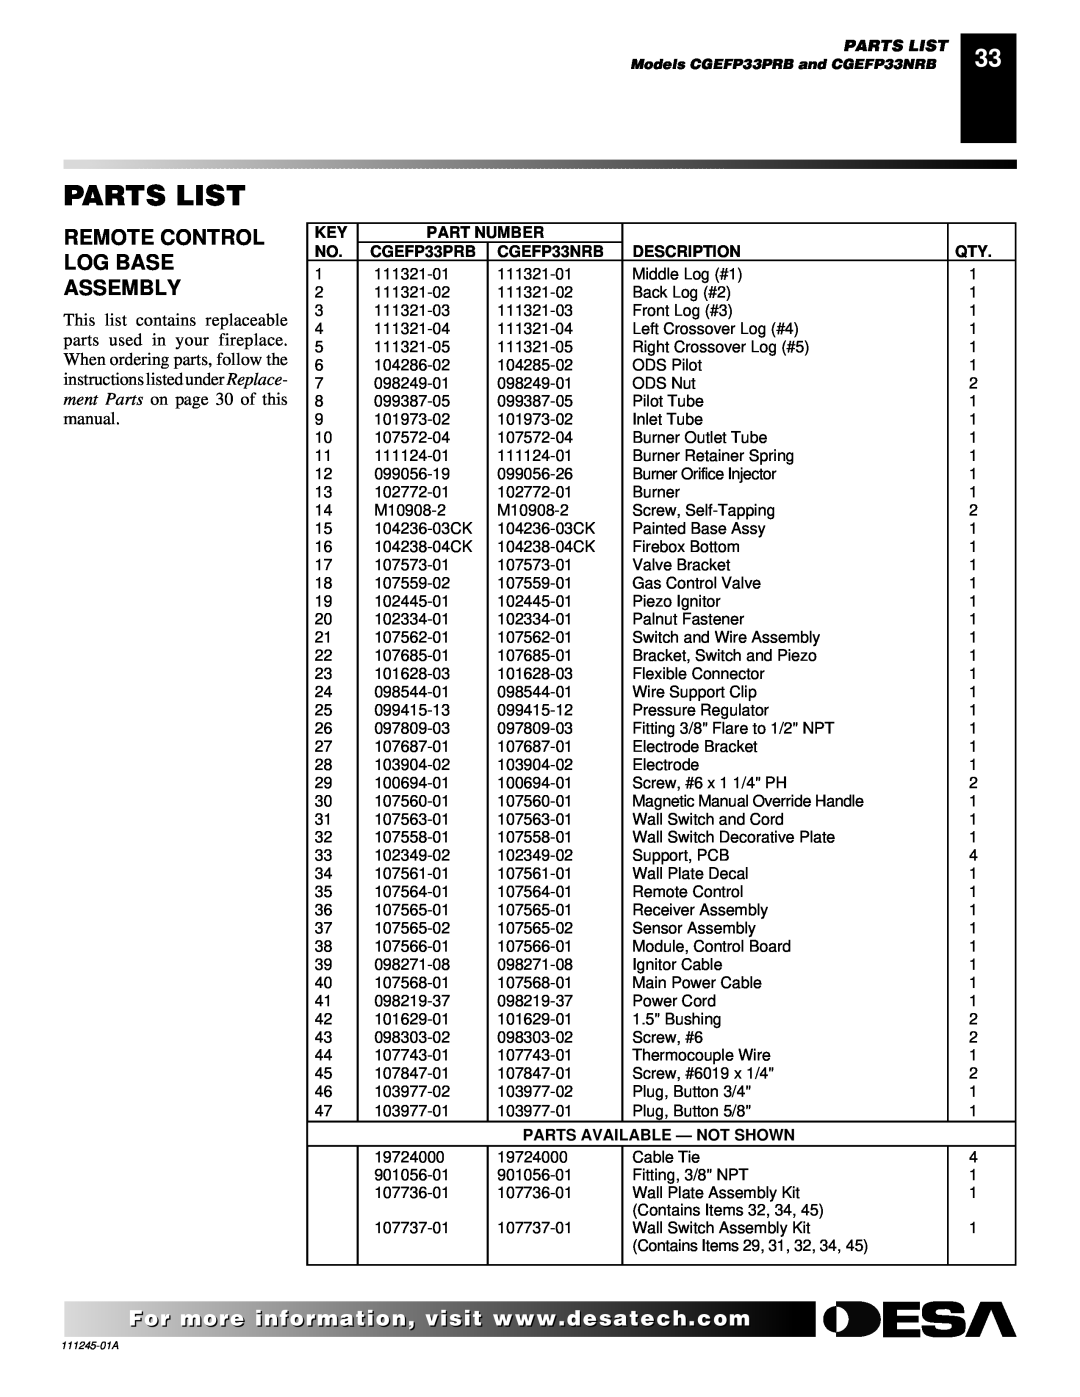 Desa CGEFP33NRB installation manual Parts List, Part Number, CGEFP33PRB, Description, Parts Available - Not Shown 